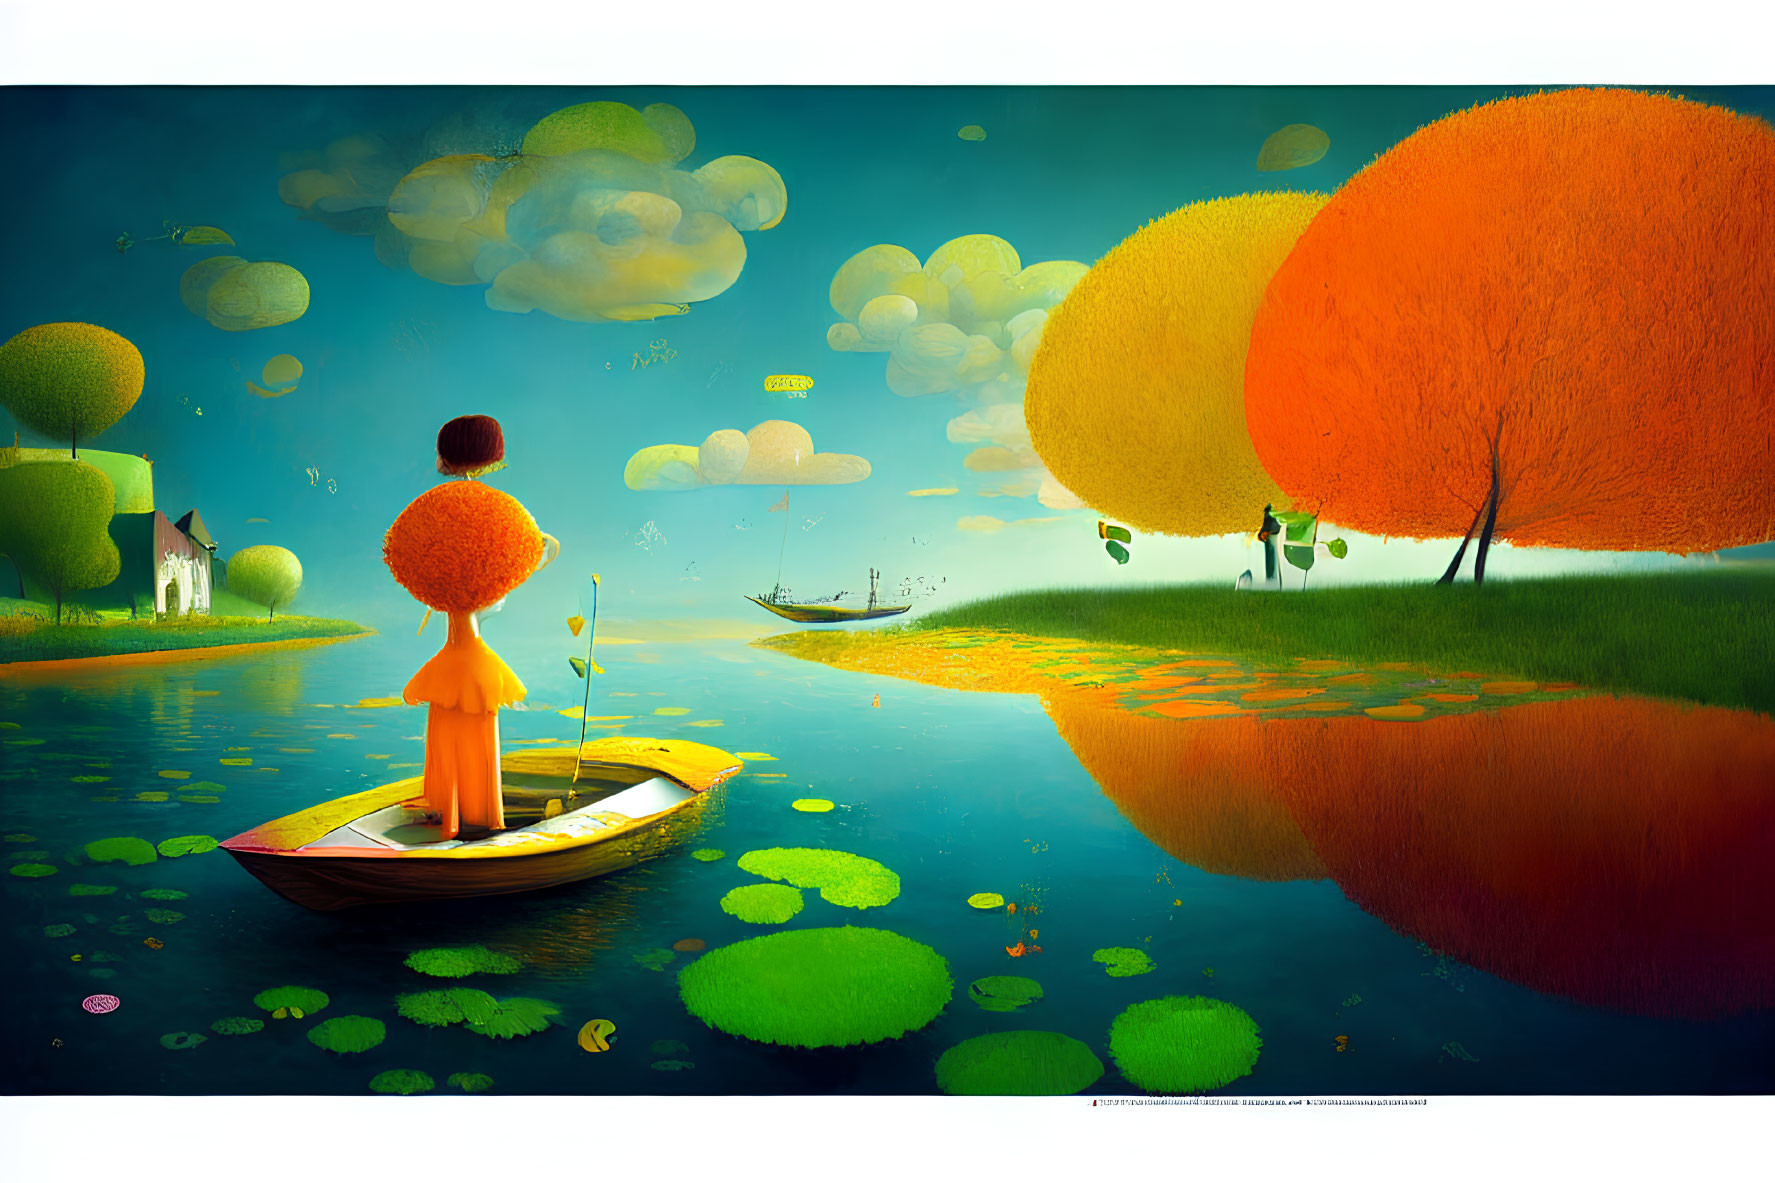 Vibrant surreal landscape with child on boat & stylized elements